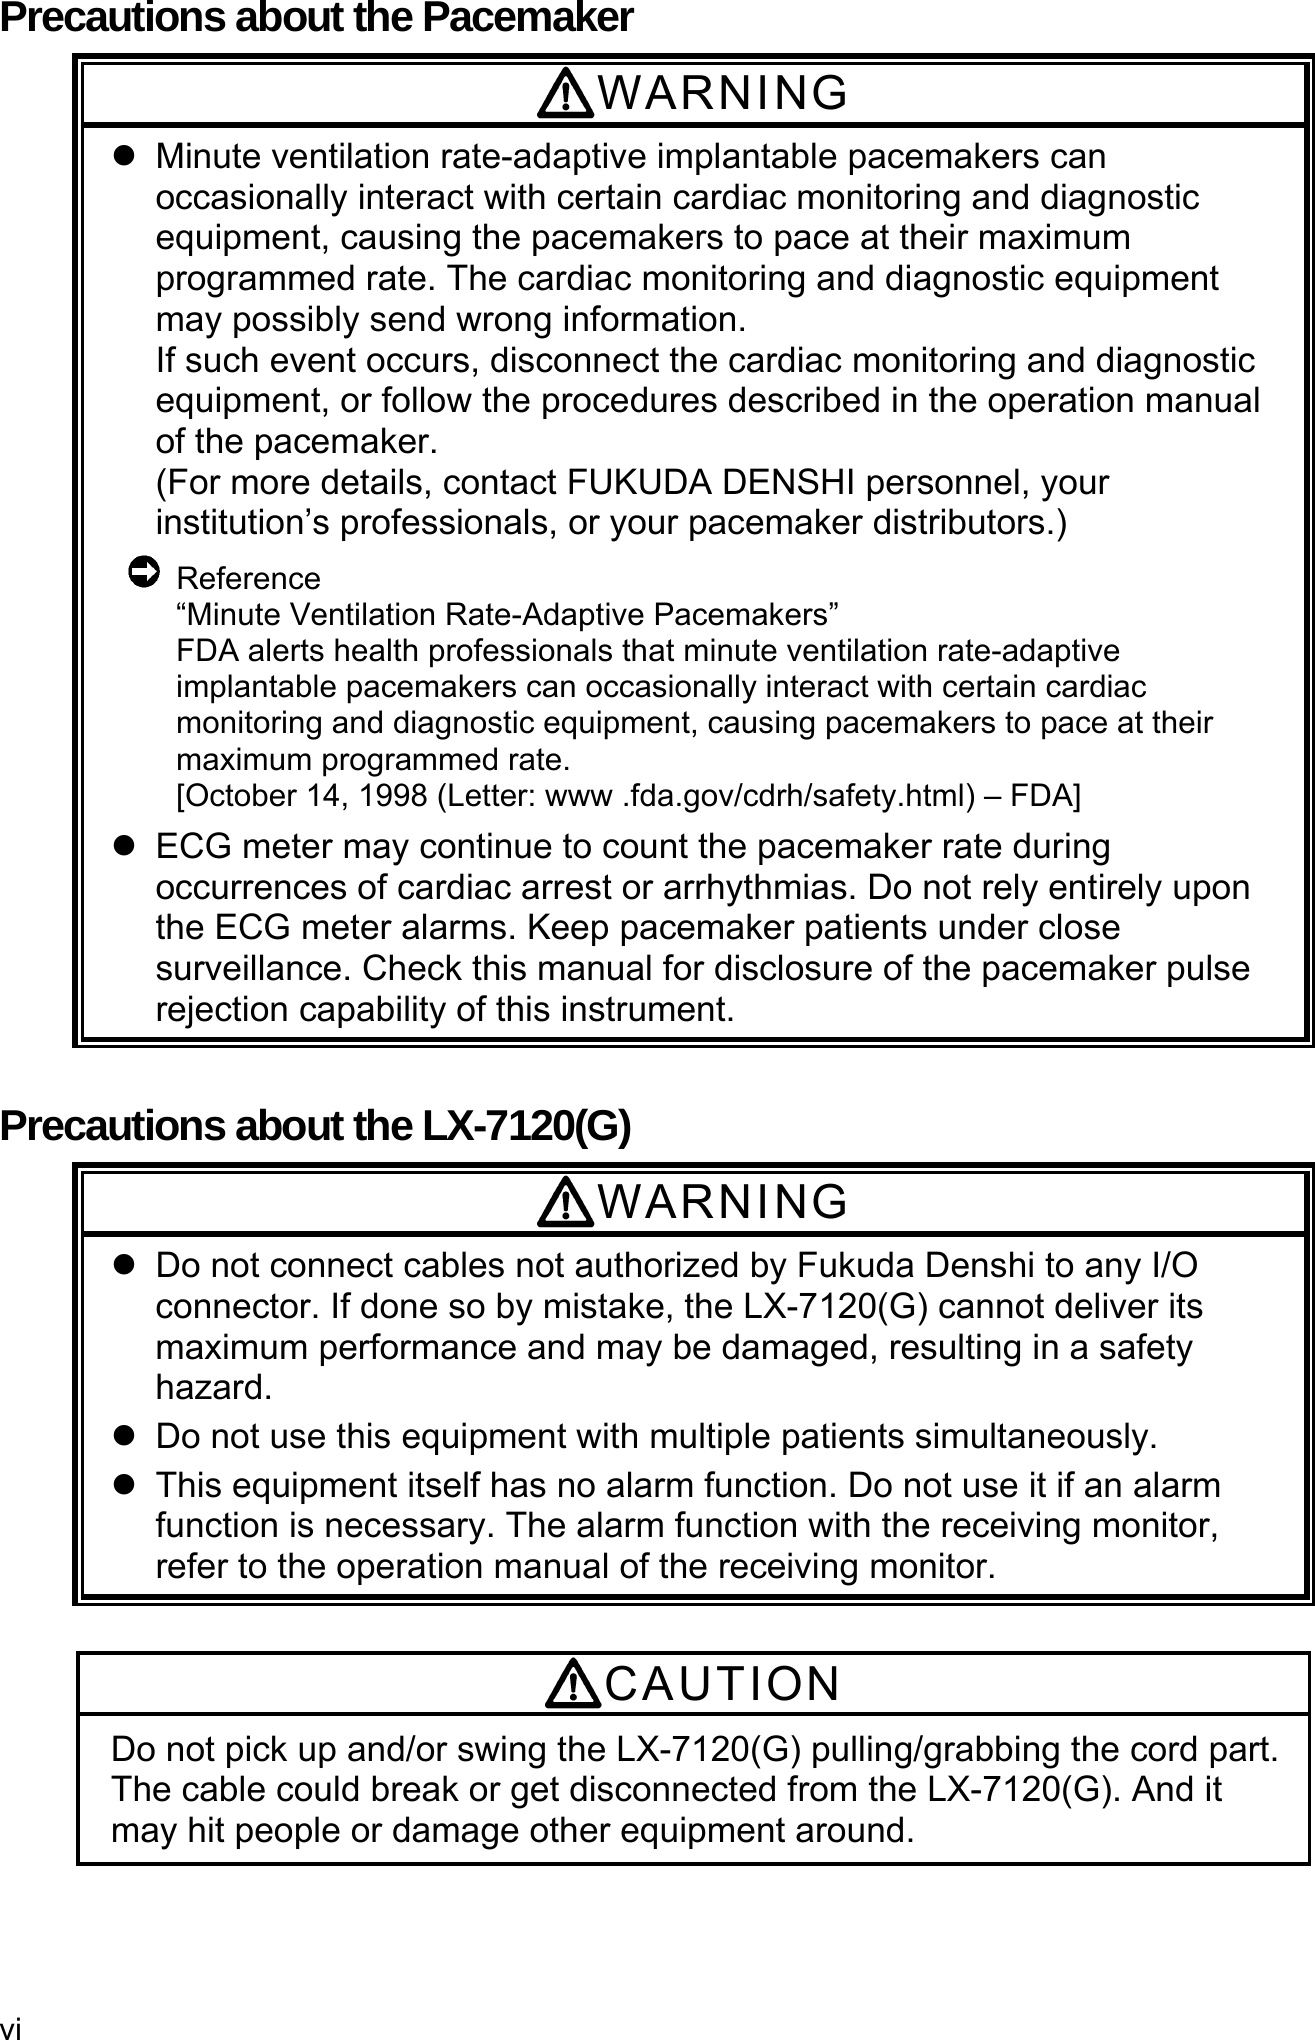 vi  Precautions about the Pacemaker WARNING   Minute ventilation rate-adaptive implantable pacemakers can occasionally interact with certain cardiac monitoring and diagnostic equipment, causing the pacemakers to pace at their maximum programmed rate. The cardiac monitoring and diagnostic equipment may possibly send wrong information. If such event occurs, disconnect the cardiac monitoring and diagnostic equipment, or follow the procedures described in the operation manual of the pacemaker. (For more details, contact FUKUDA DENSHI personnel, your institution’s professionals, or your pacemaker distributors.)  Reference “Minute Ventilation Rate-Adaptive Pacemakers” FDA alerts health professionals that minute ventilation rate-adaptive implantable pacemakers can occasionally interact with certain cardiac monitoring and diagnostic equipment, causing pacemakers to pace at their maximum programmed rate. [October 14, 1998 (Letter: www .fda.gov/cdrh/safety.html) – FDA]   ECG meter may continue to count the pacemaker rate during occurrences of cardiac arrest or arrhythmias. Do not rely entirely upon the ECG meter alarms. Keep pacemaker patients under close surveillance. Check this manual for disclosure of the pacemaker pulse rejection capability of this instrument.  Precautions about the LX-7120(G) WARNING   Do not connect cables not authorized by Fukuda Denshi to any I/O connector. If done so by mistake, the LX-7120(G) cannot deliver its maximum performance and may be damaged, resulting in a safety hazard.   Do not use this equipment with multiple patients simultaneously.   This equipment itself has no alarm function. Do not use it if an alarm function is necessary. The alarm function with the receiving monitor, refer to the operation manual of the receiving monitor.  CAUTION Do not pick up and/or swing the LX-7120(G) pulling/grabbing the cord part. The cable could break or get disconnected from the LX-7120(G). And it may hit people or damage other equipment around. 